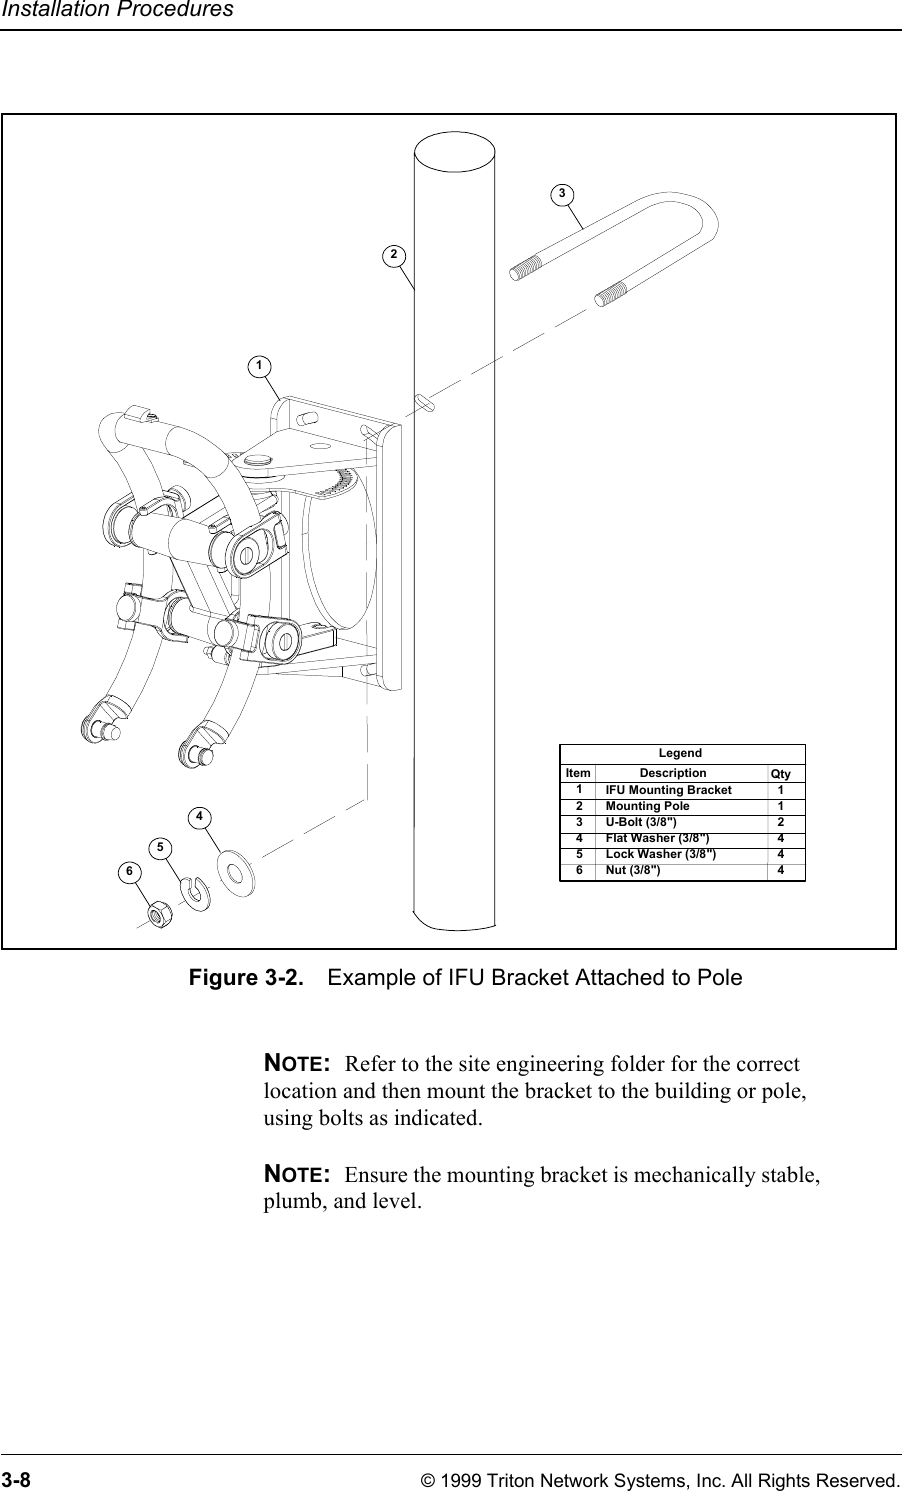 Installation Procedures3-8 © 1999 Triton Network Systems, Inc. All Rights Reserved.Figure 3-2. Example of IFU Bracket Attached to PoleNOTE:  Refer to the site engineering folder for the correct location and then mount the bracket to the building or pole, using bolts as indicated. NOTE:  Ensure the mounting bracket is mechanically stable, plumb, and level.LegendItem   1   2   3   4   5   6             DescriptionIFU Mounting BracketMounting PoleU-Bolt (3/8&quot;)Flat Washer (3/8&quot;)Lock Washer (3/8&quot;)Nut (3/8&quot;)Qty  1  1  2  4  4  4  456132